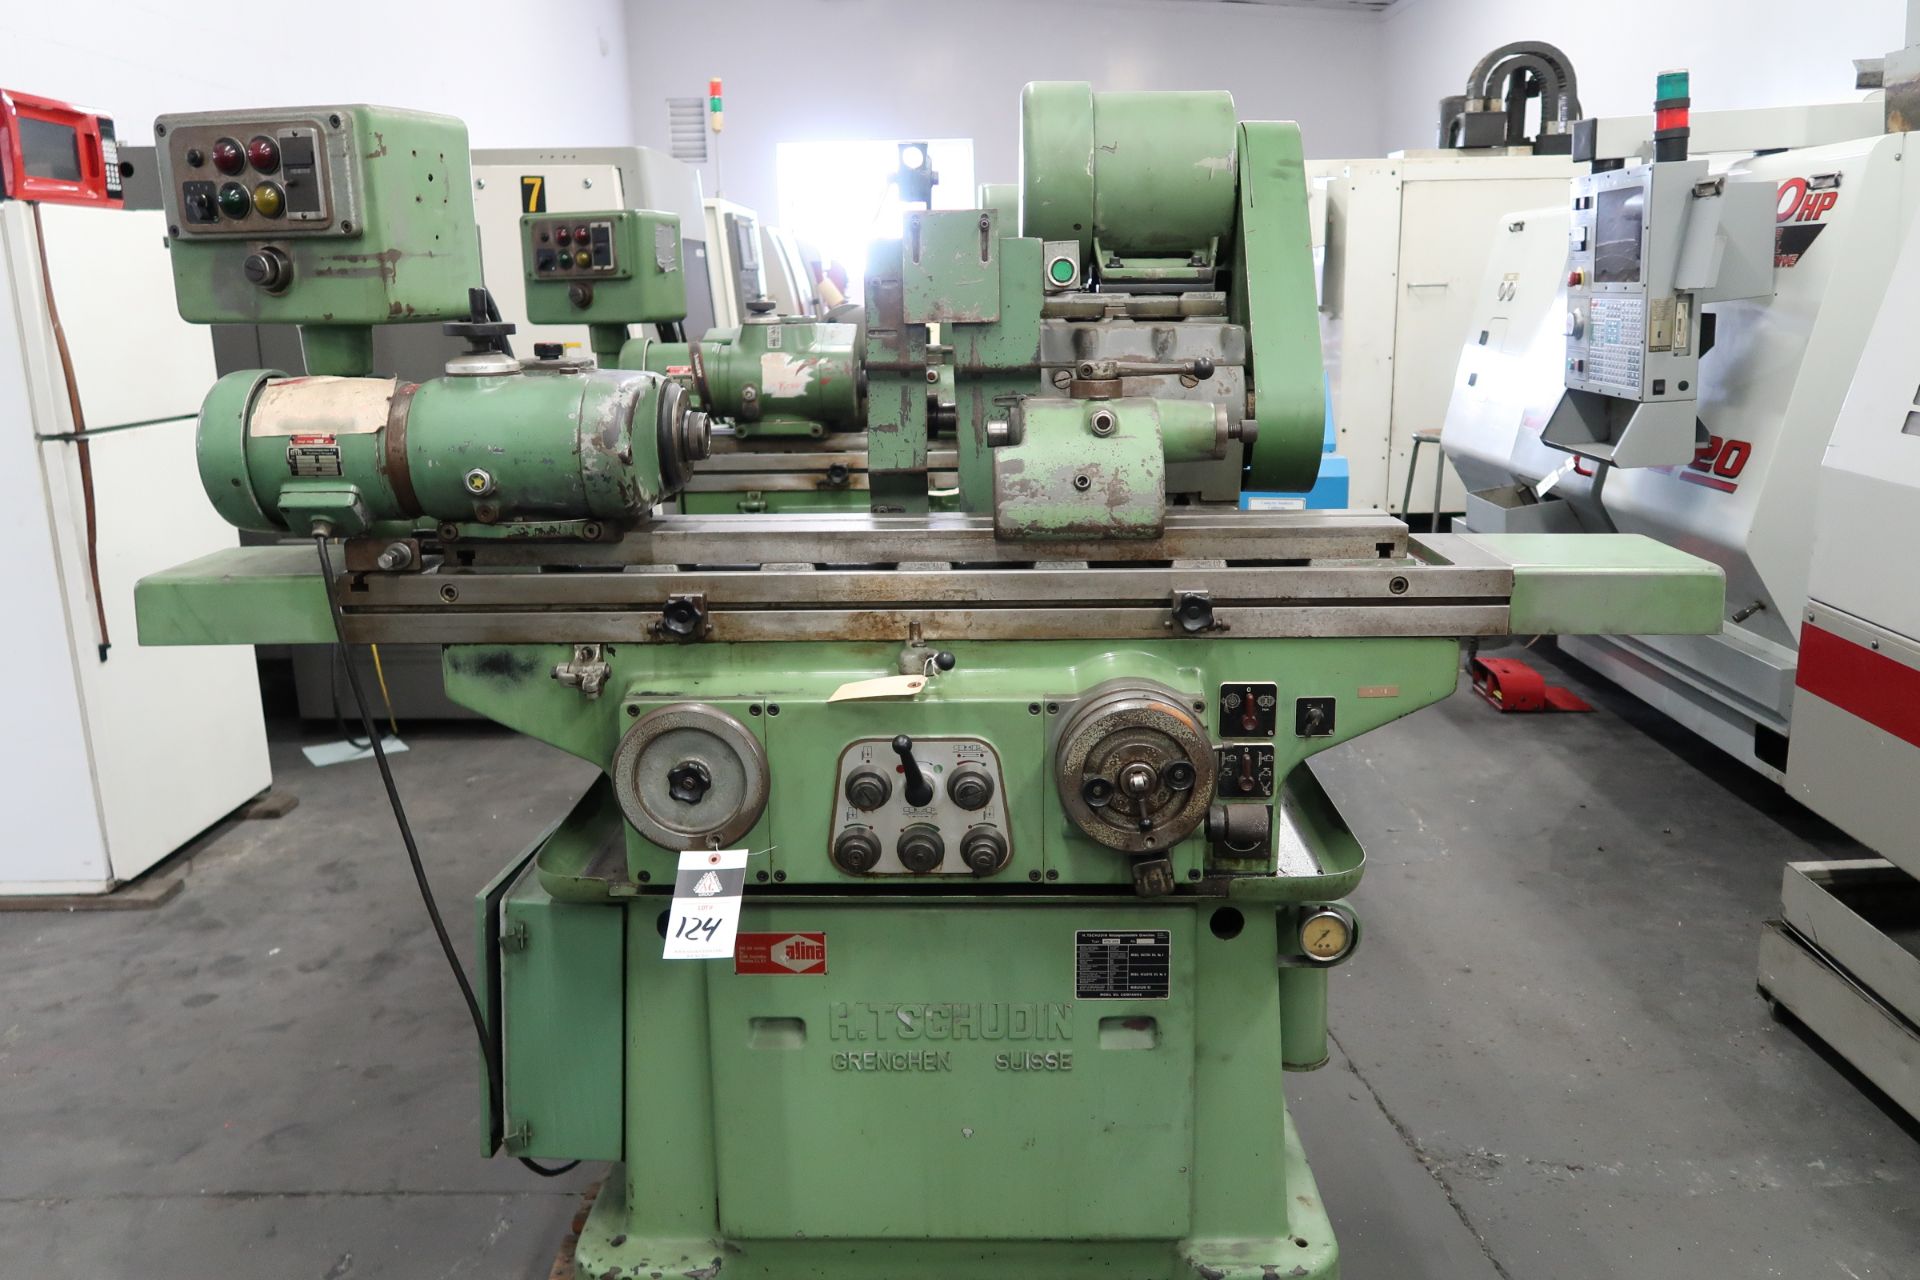 Tschudin HTG400 8” x 24” Cyl Grinder s/n 691302 w/ Motorized 5C Work Head, Tailstock, SOLD AS IS